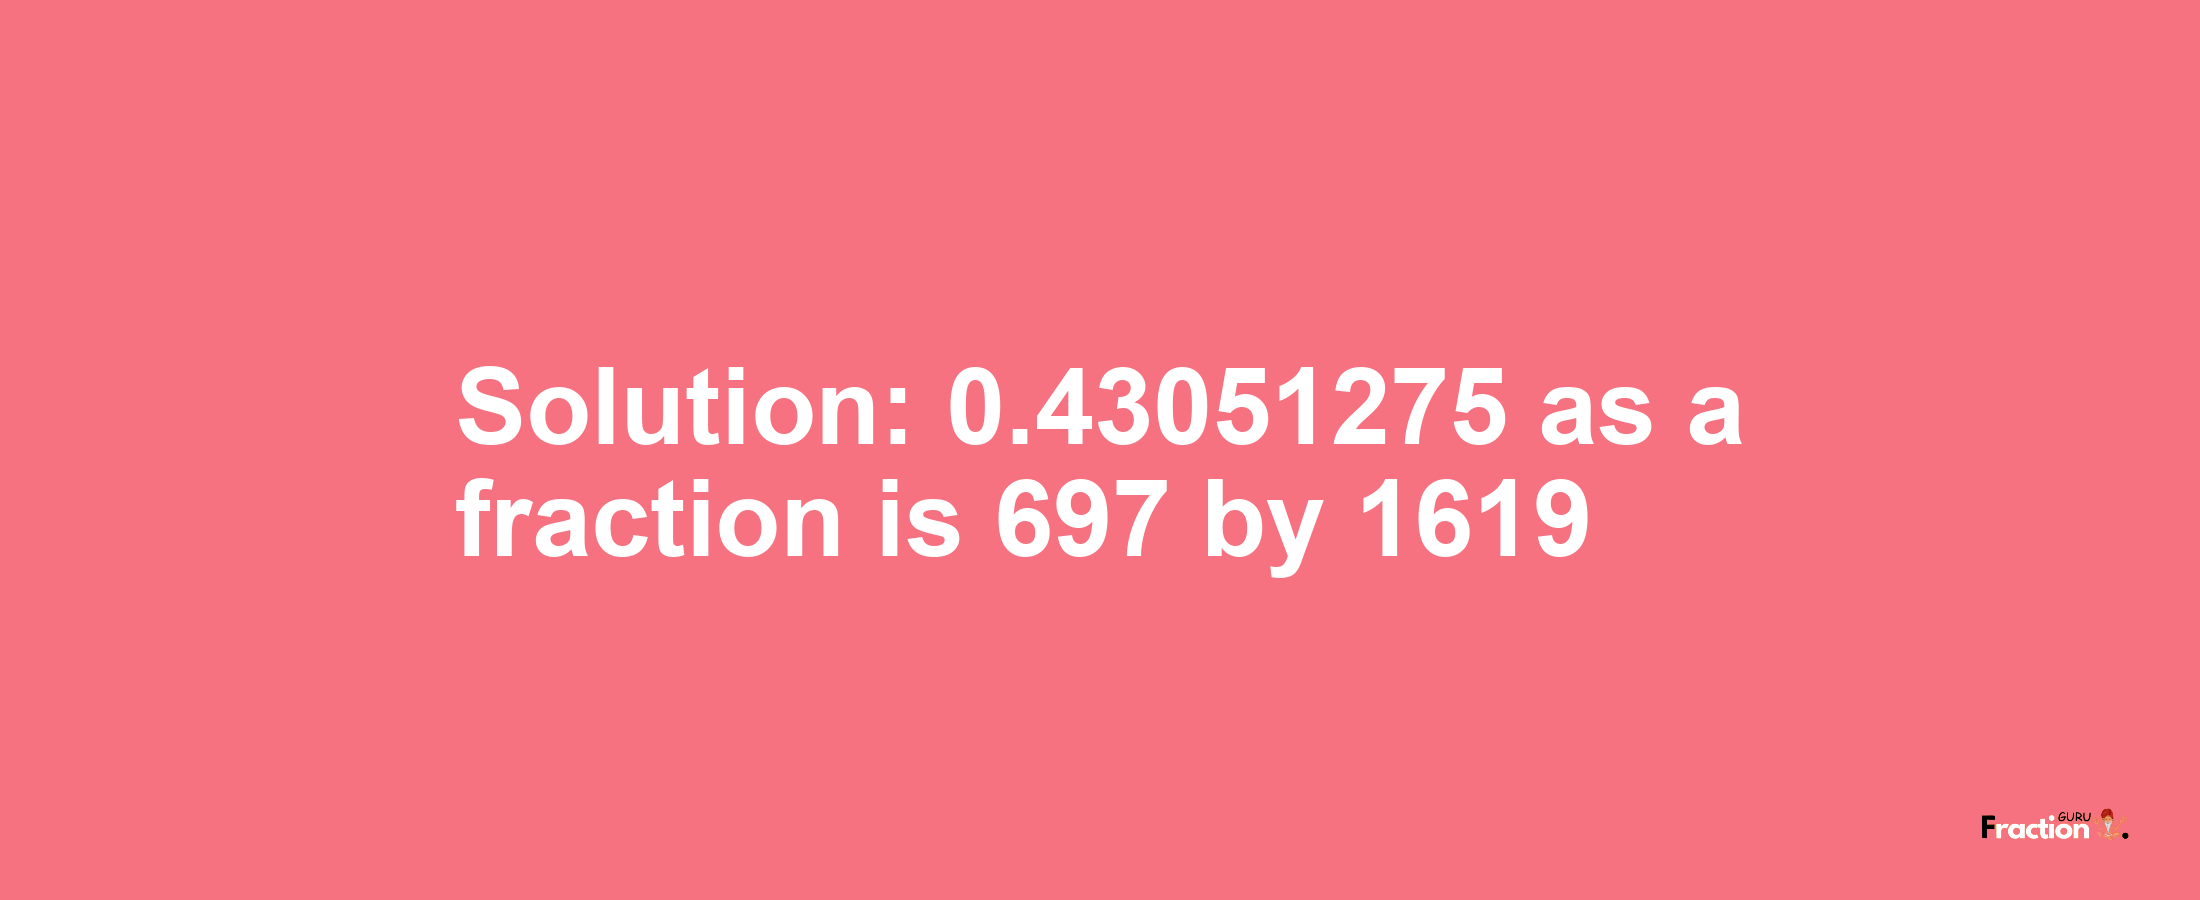 Solution:0.43051275 as a fraction is 697/1619